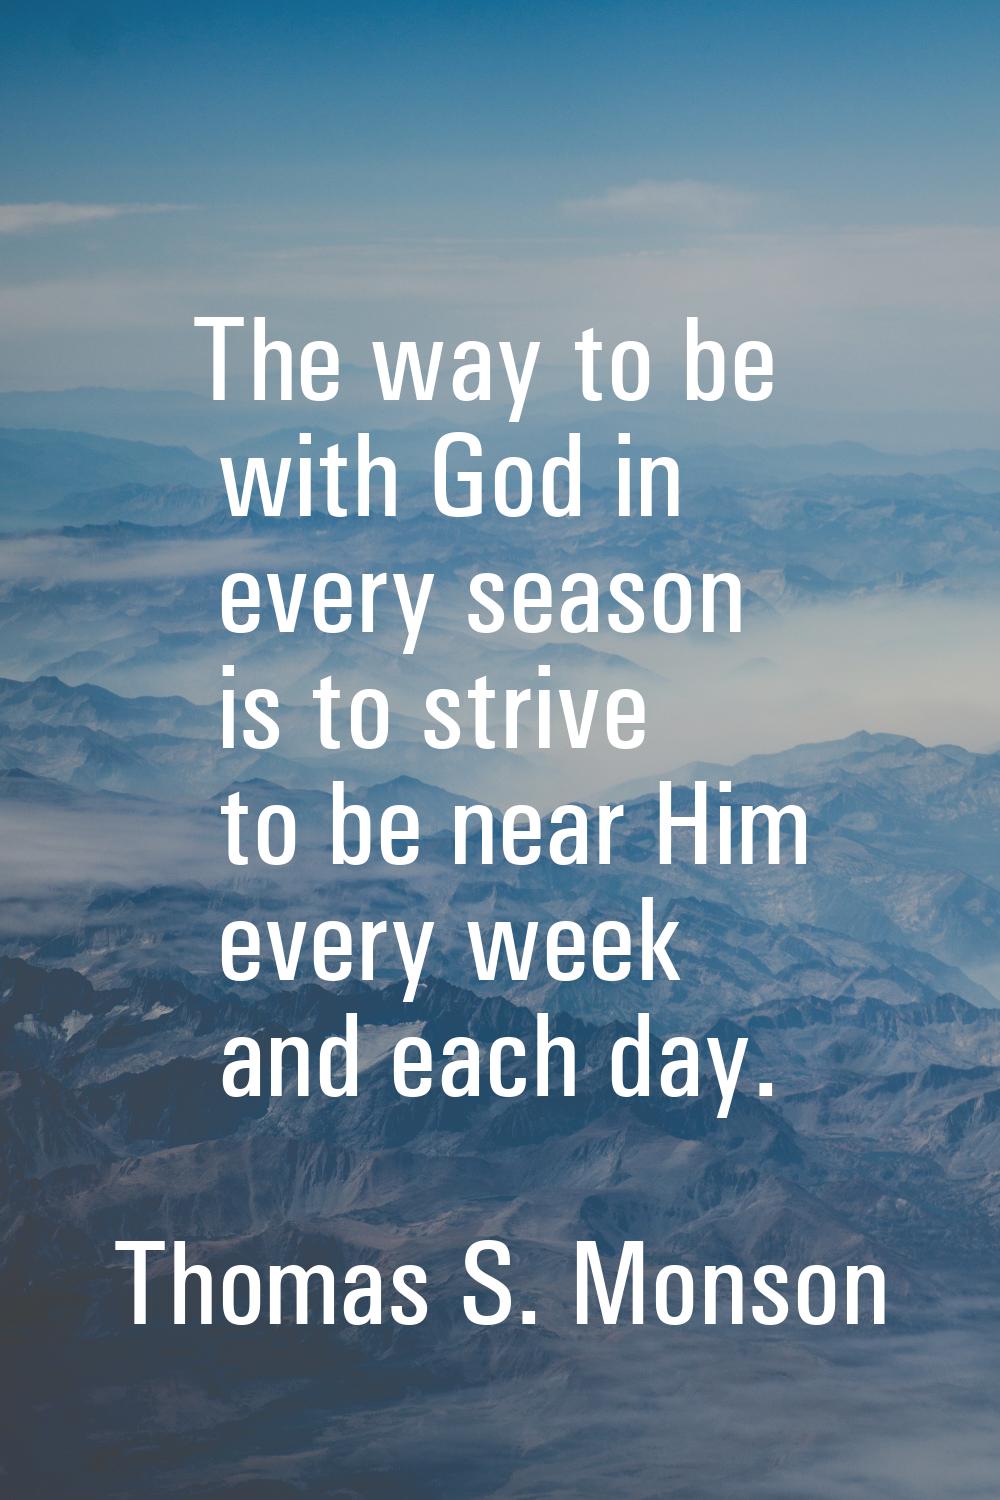 The way to be with God in every season is to strive to be near Him every week and each day.